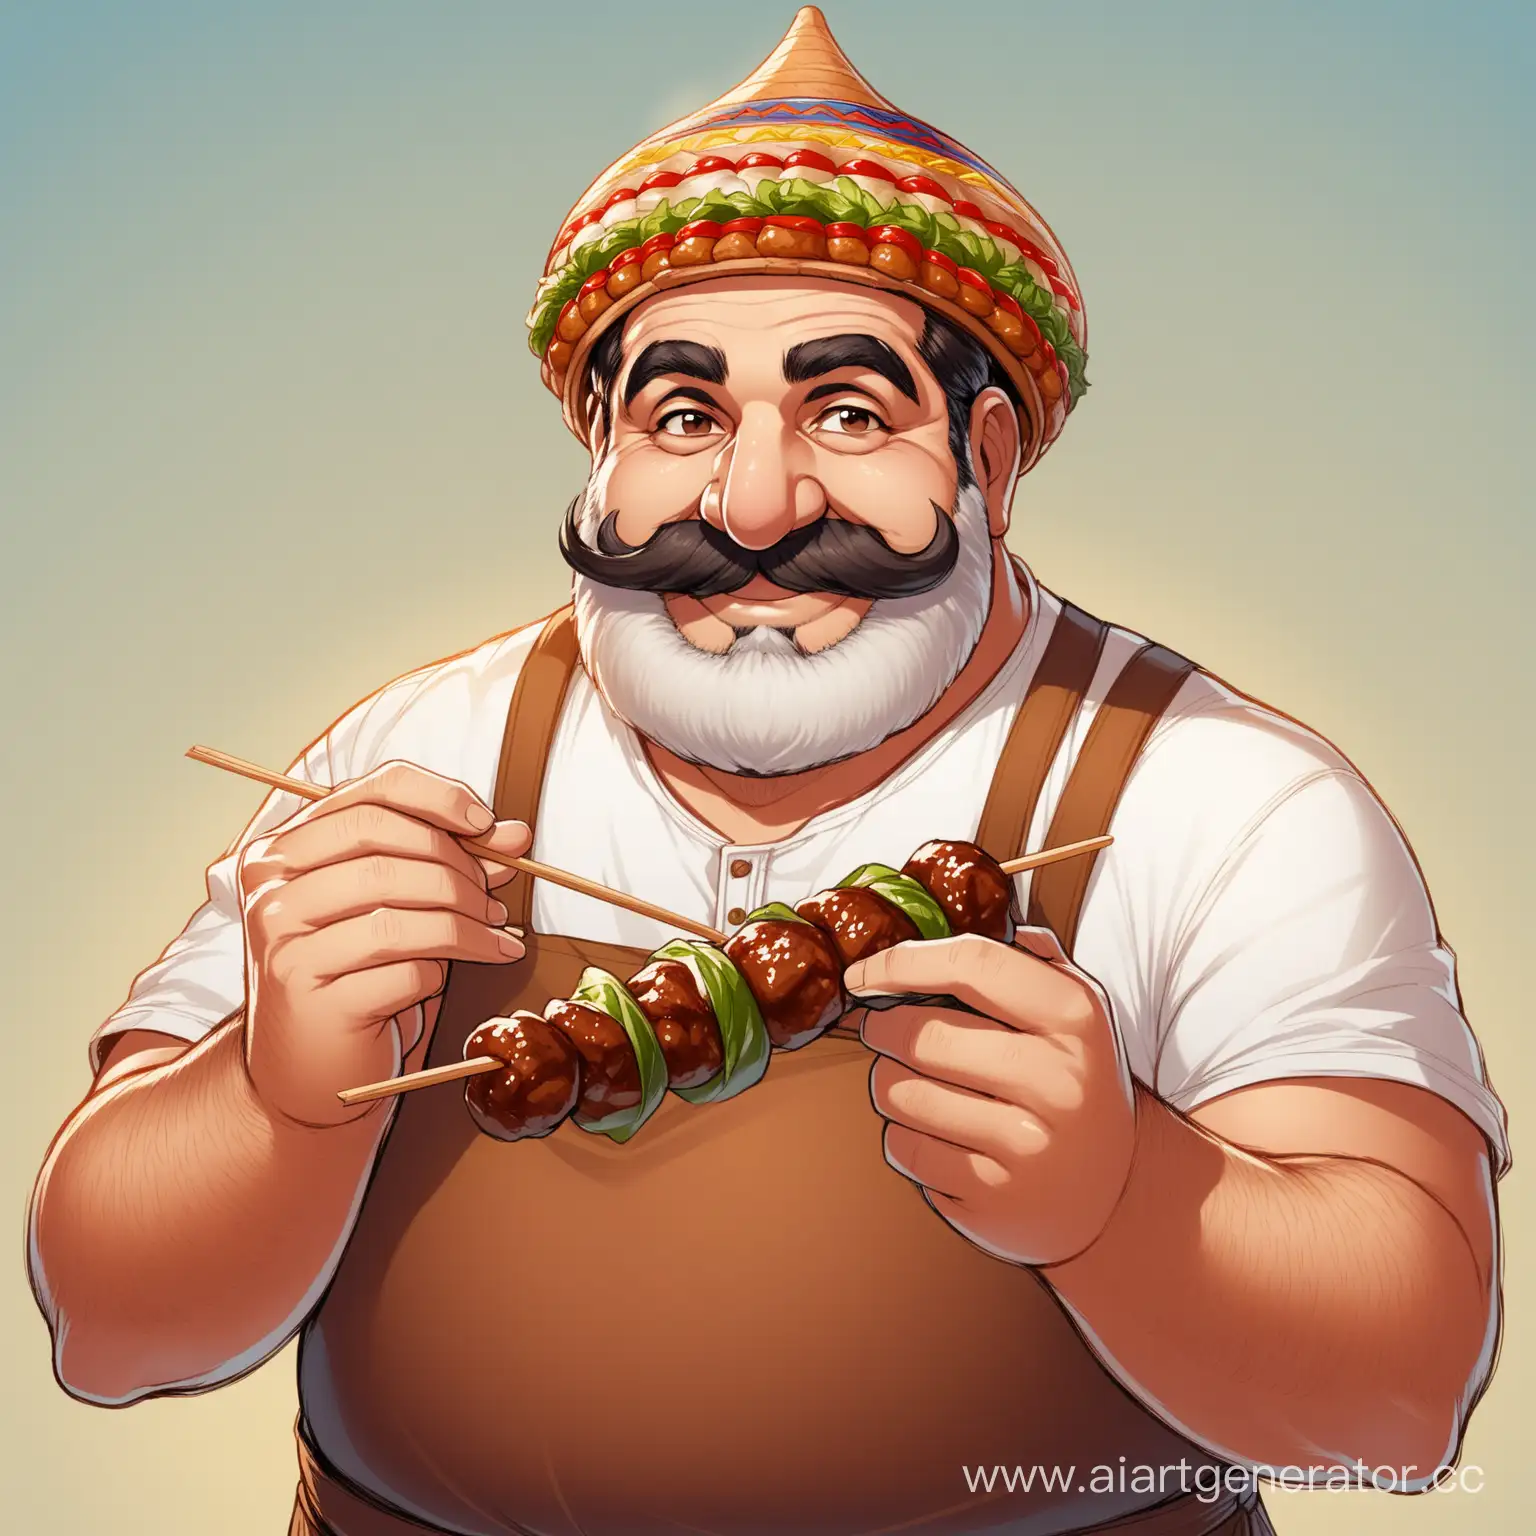 Armenian-Chef-with-Distinguished-Features-Serving-Shashlik